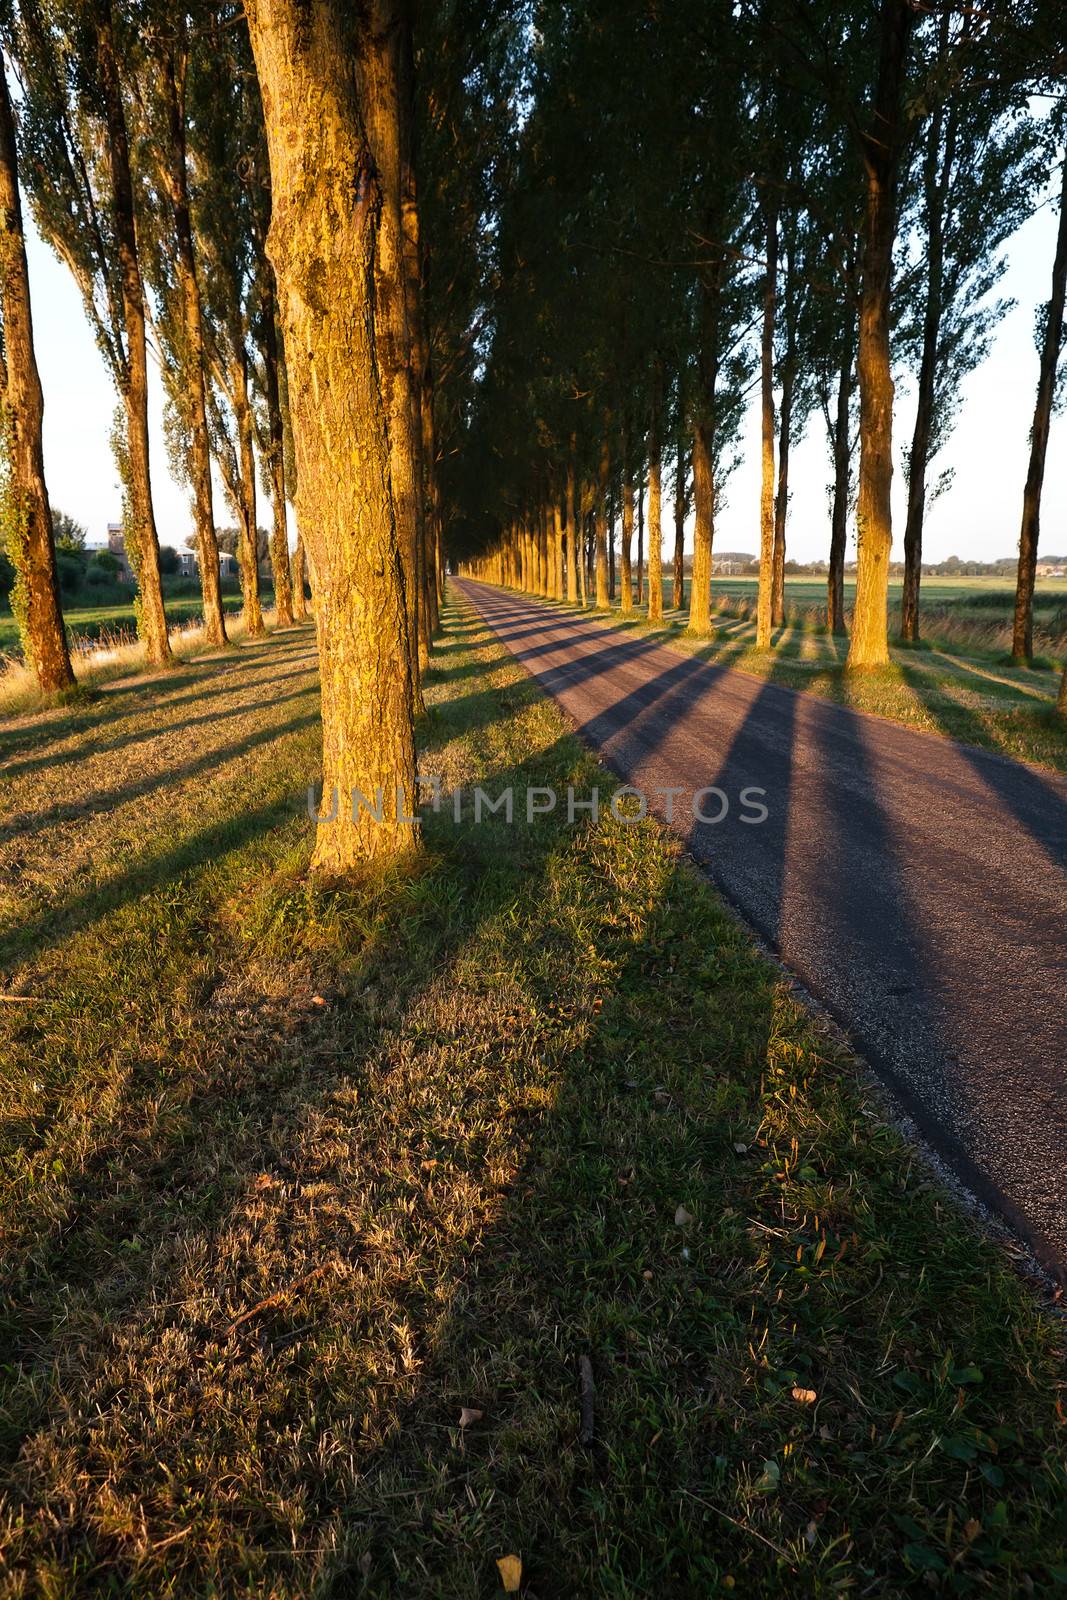 tree shadows pattern on road by catolla